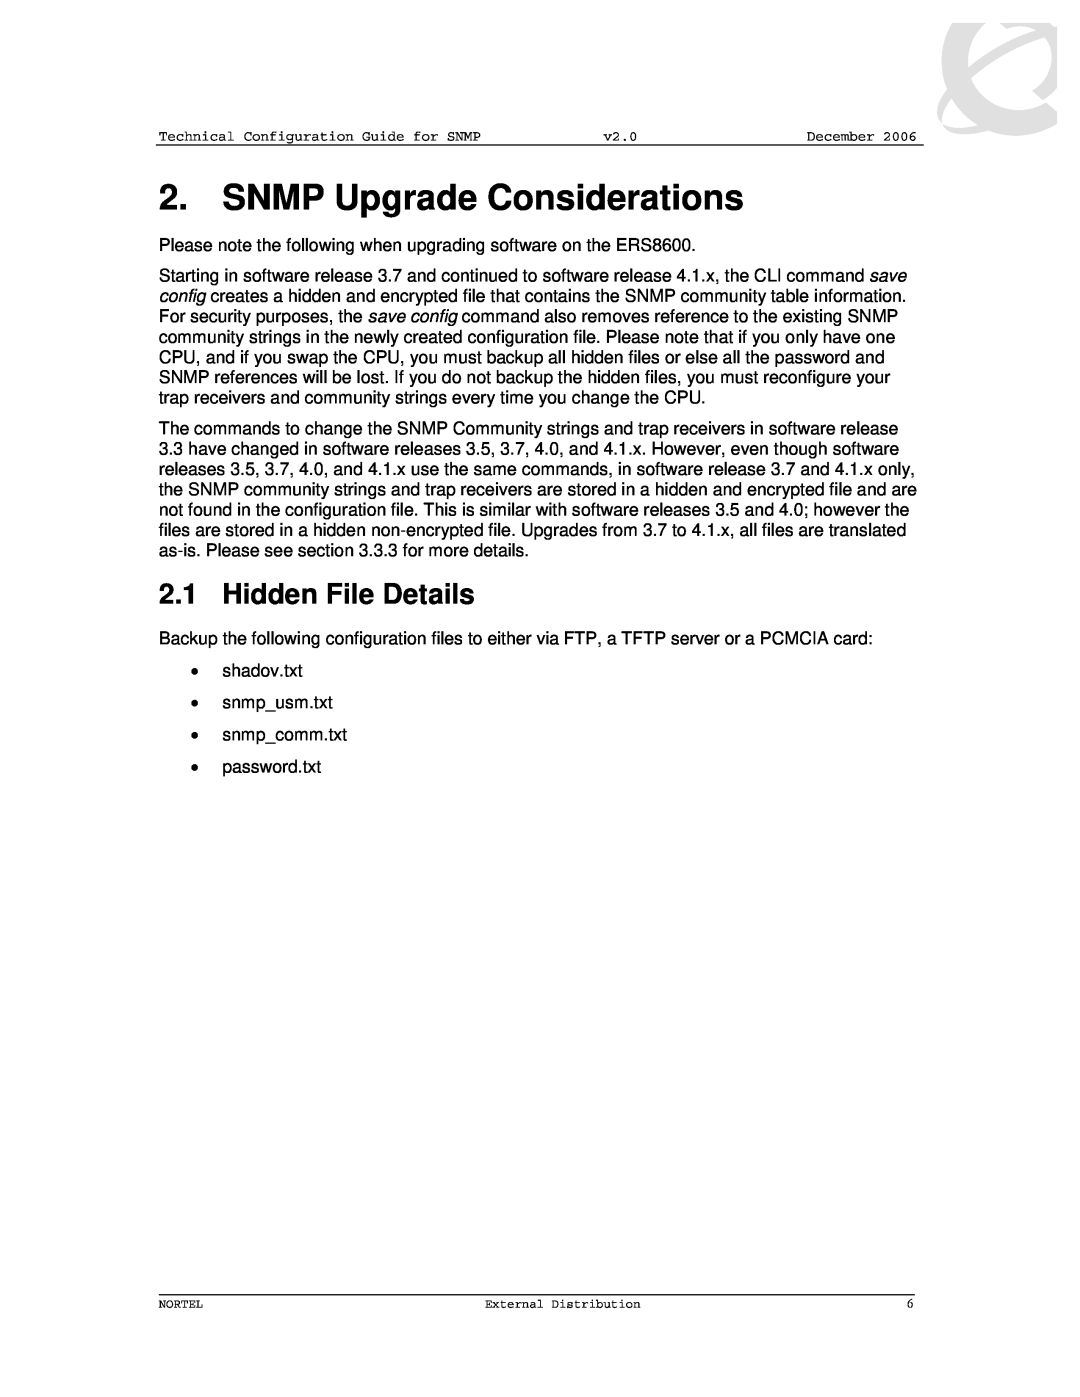 Nortel Networks 8600 manual SNMP Upgrade Considerations, Hidden File Details 